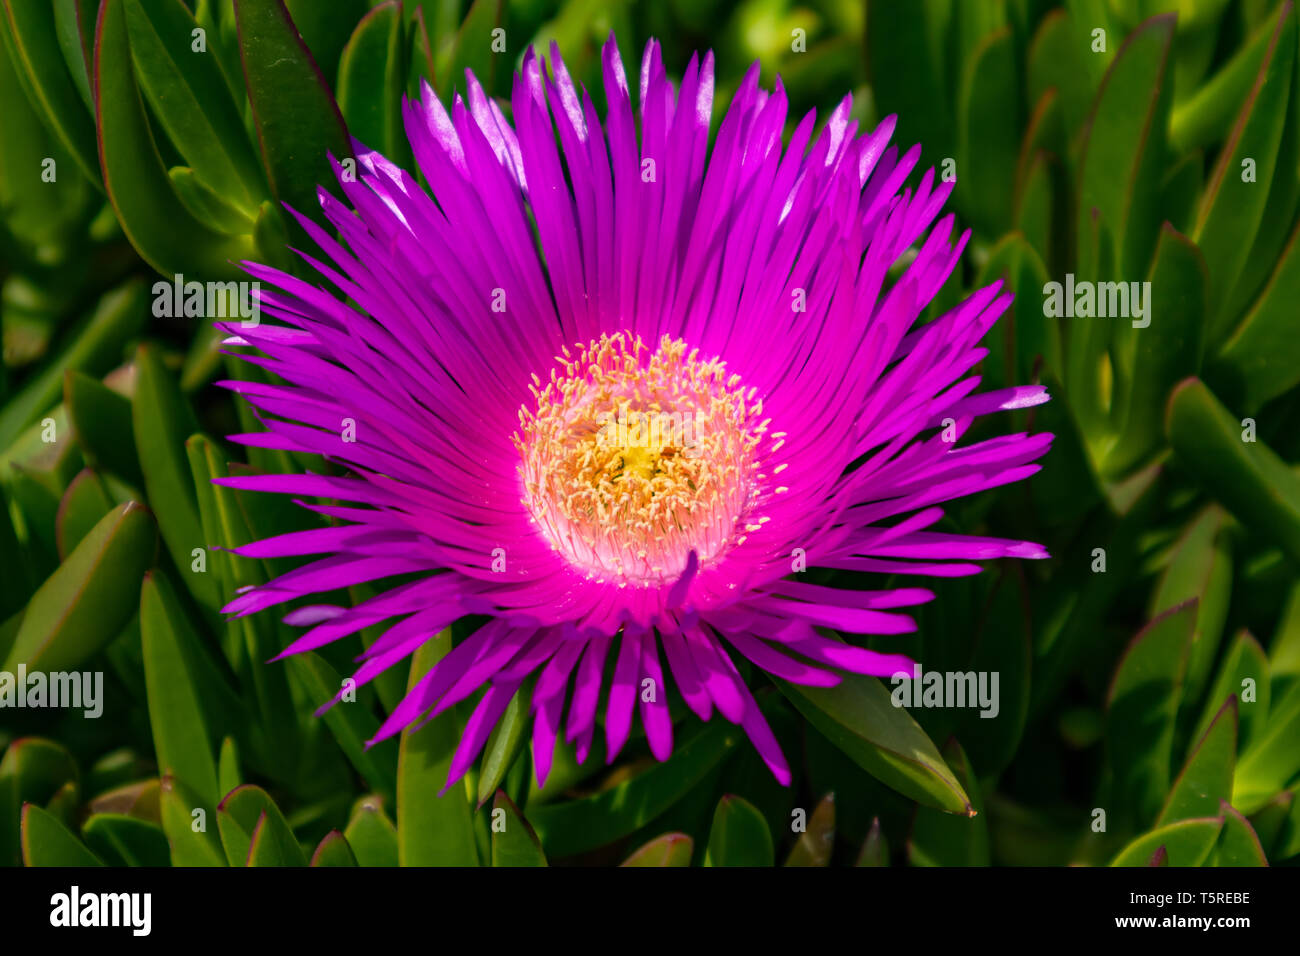 Springtime. Ice plant blossom, bright pink purple color closeup view, sunny day Stock Photo